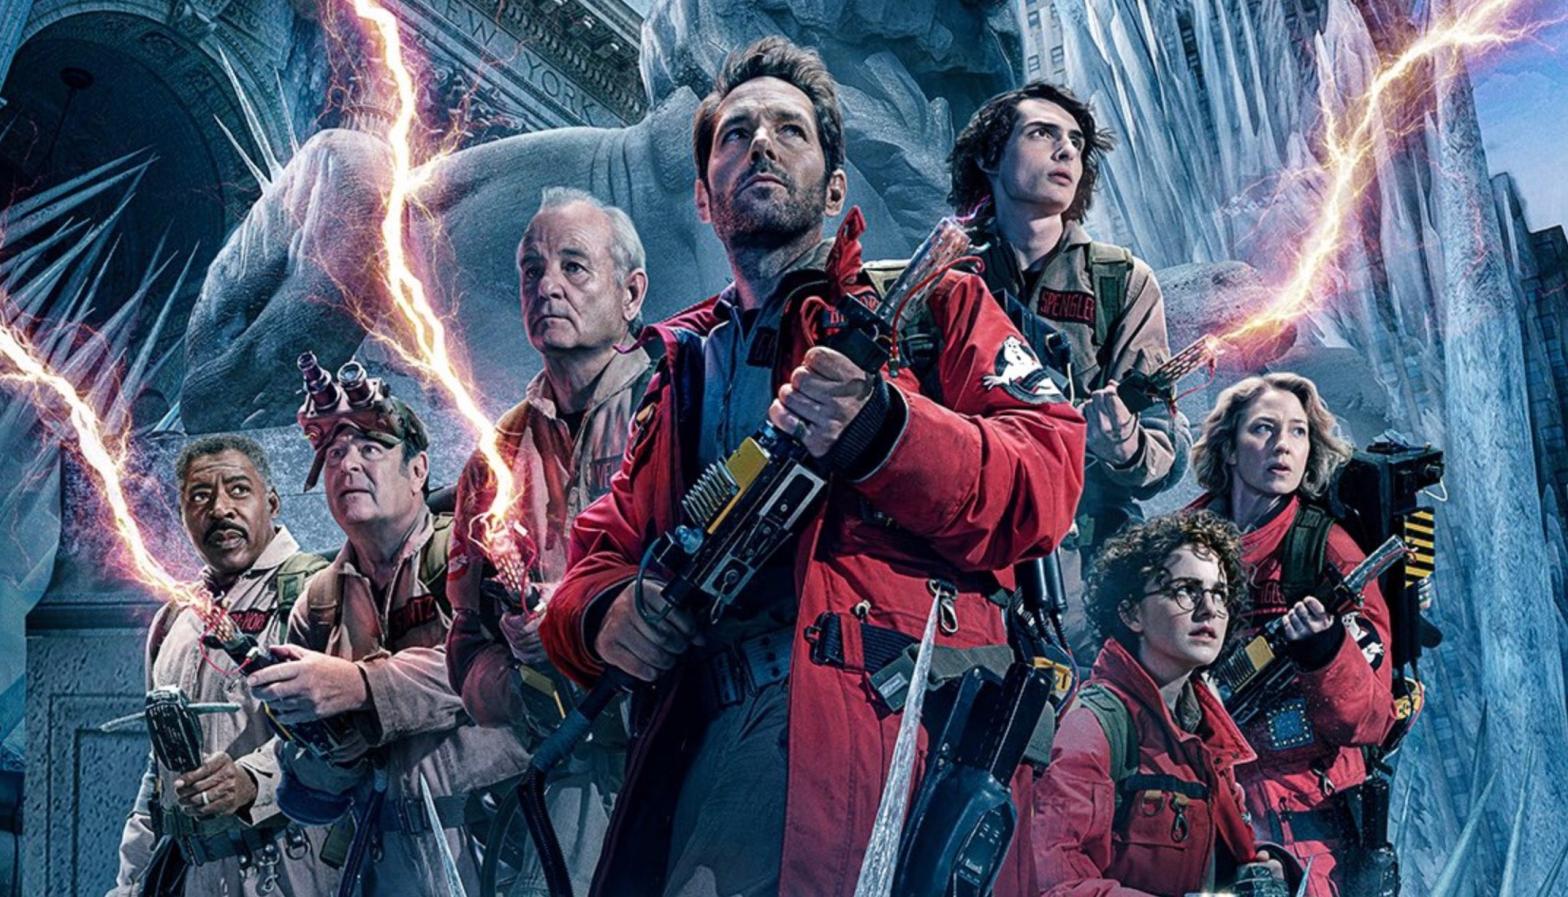 Watch The New Ghostbusters Geek Out About the Old Ghostbusters